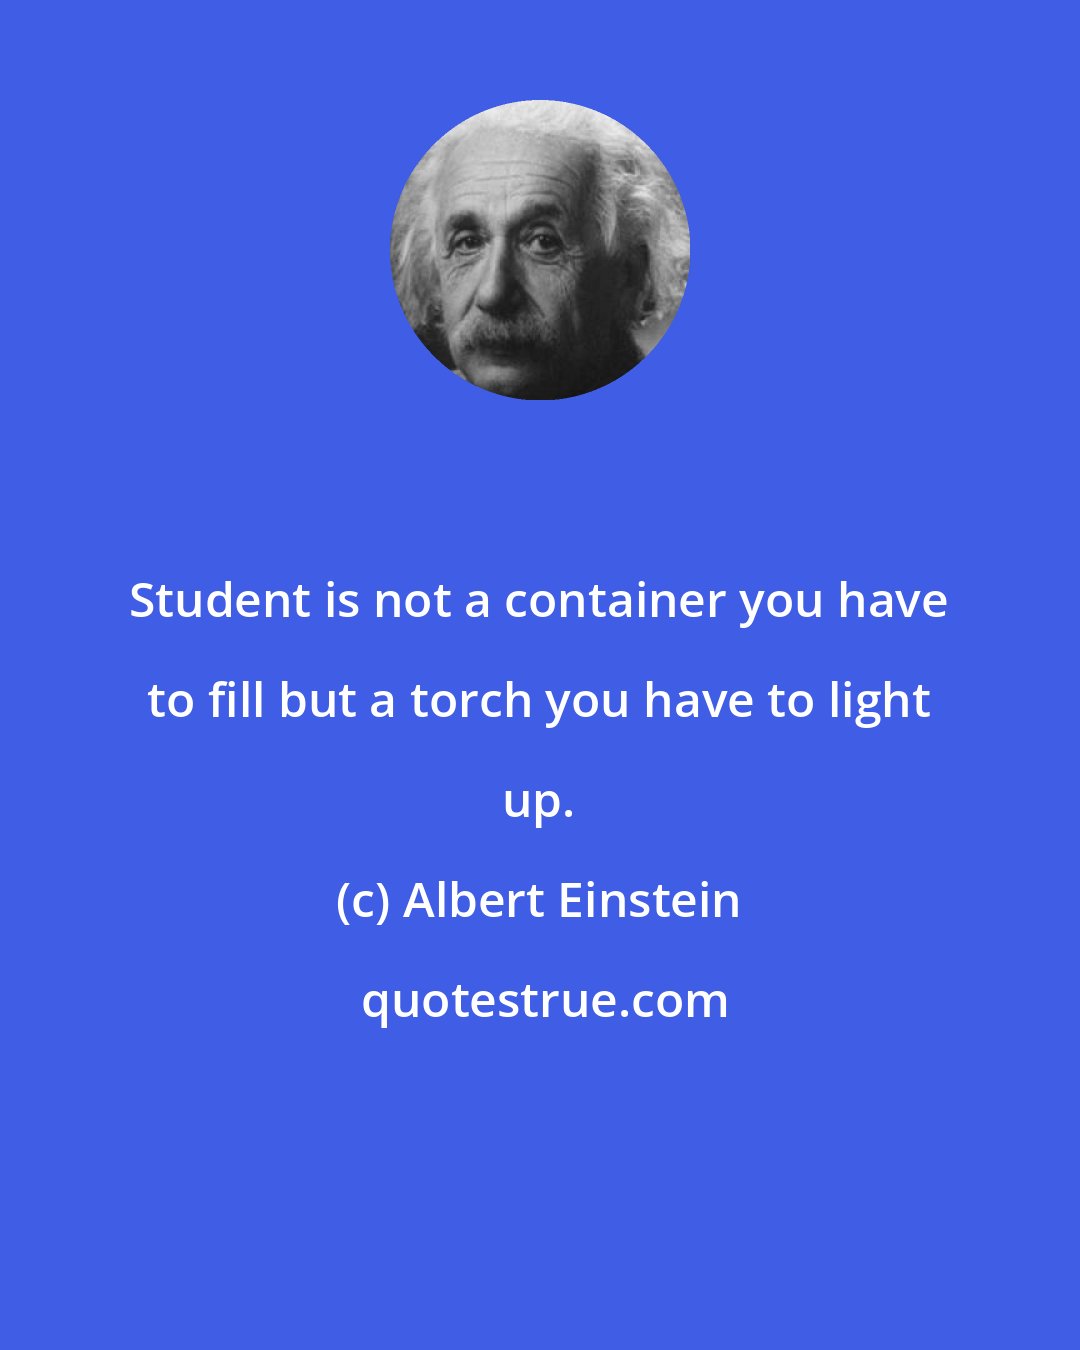 Albert Einstein: Student is not a container you have to fill but a torch you have to light up.